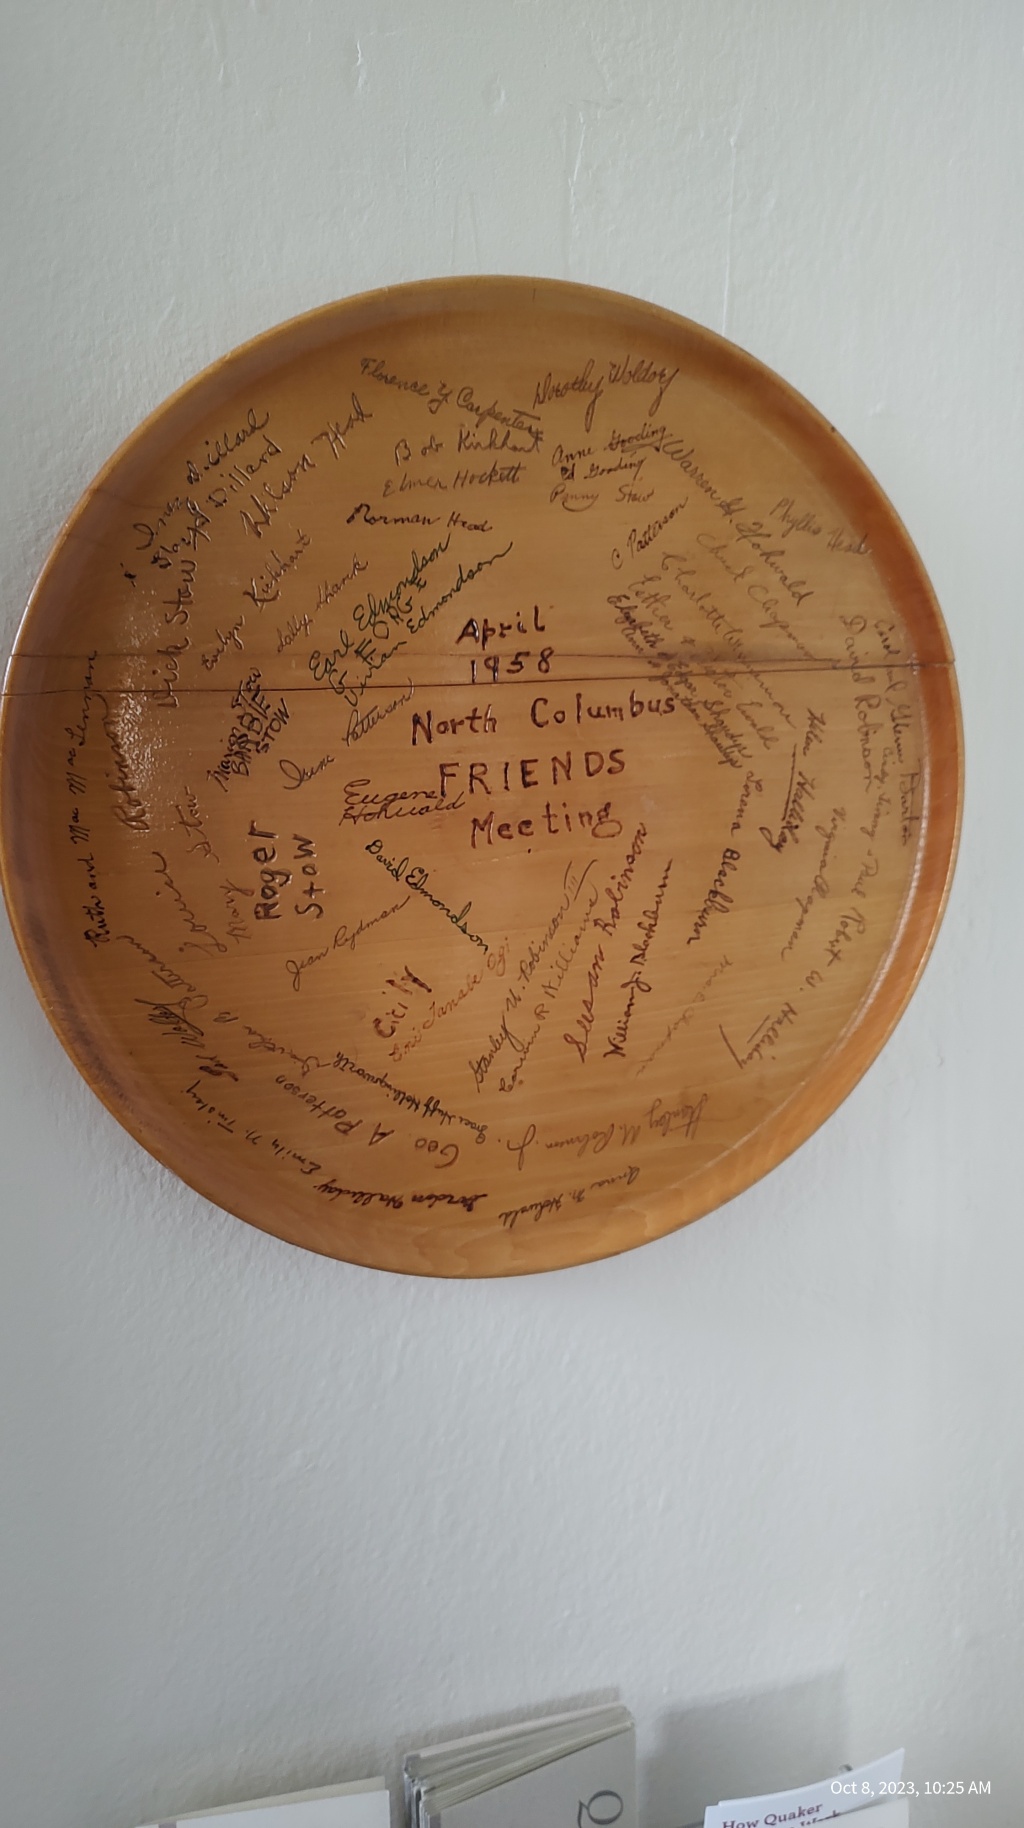 Plate with the words April, 1958 North Columbus Friends Meeting with handwritten signatures